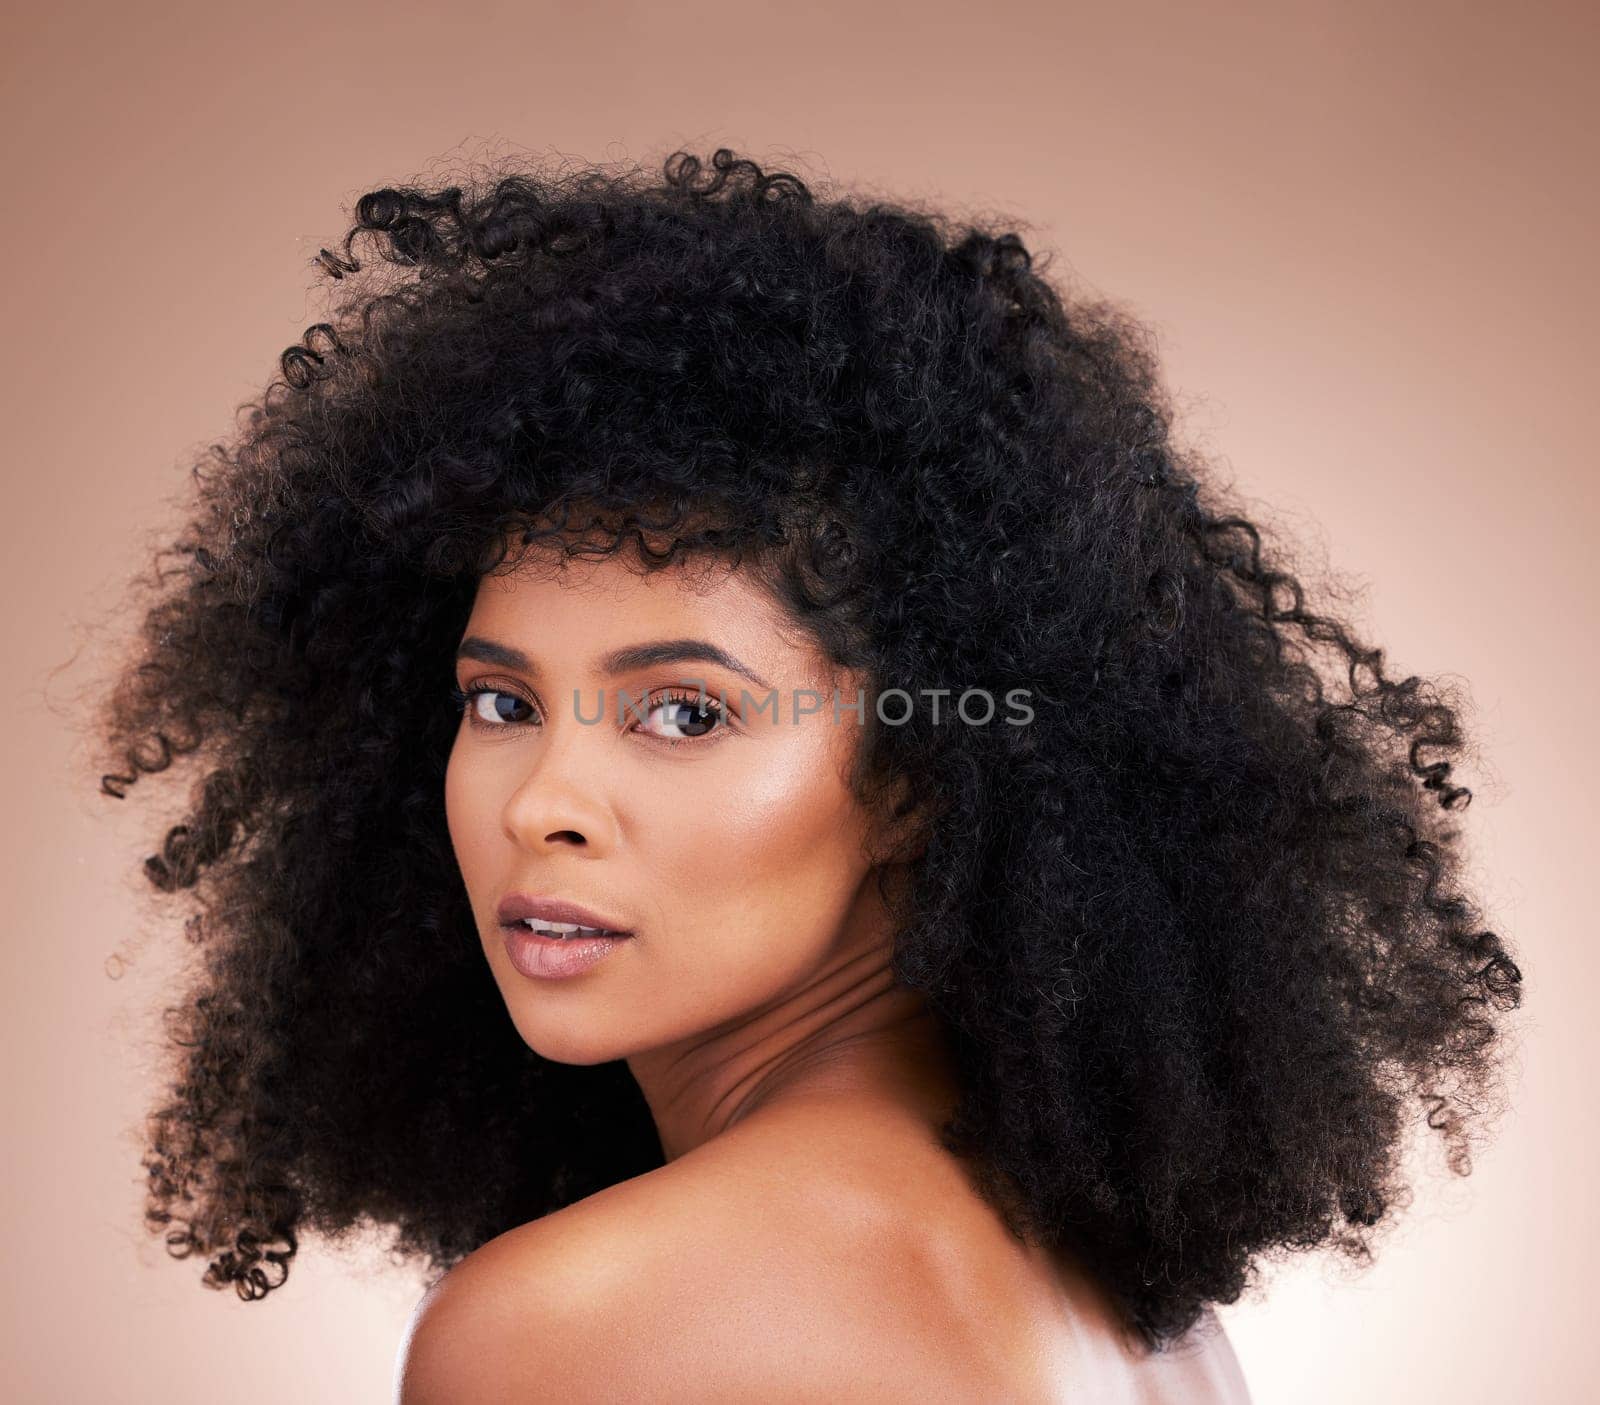 Hair, face and beauty with black woman in portrait, skin and natural cosmetics with glow on studio background. Female, cosmetic treatment with curly hairstyle, texture and growth with facial skincare.